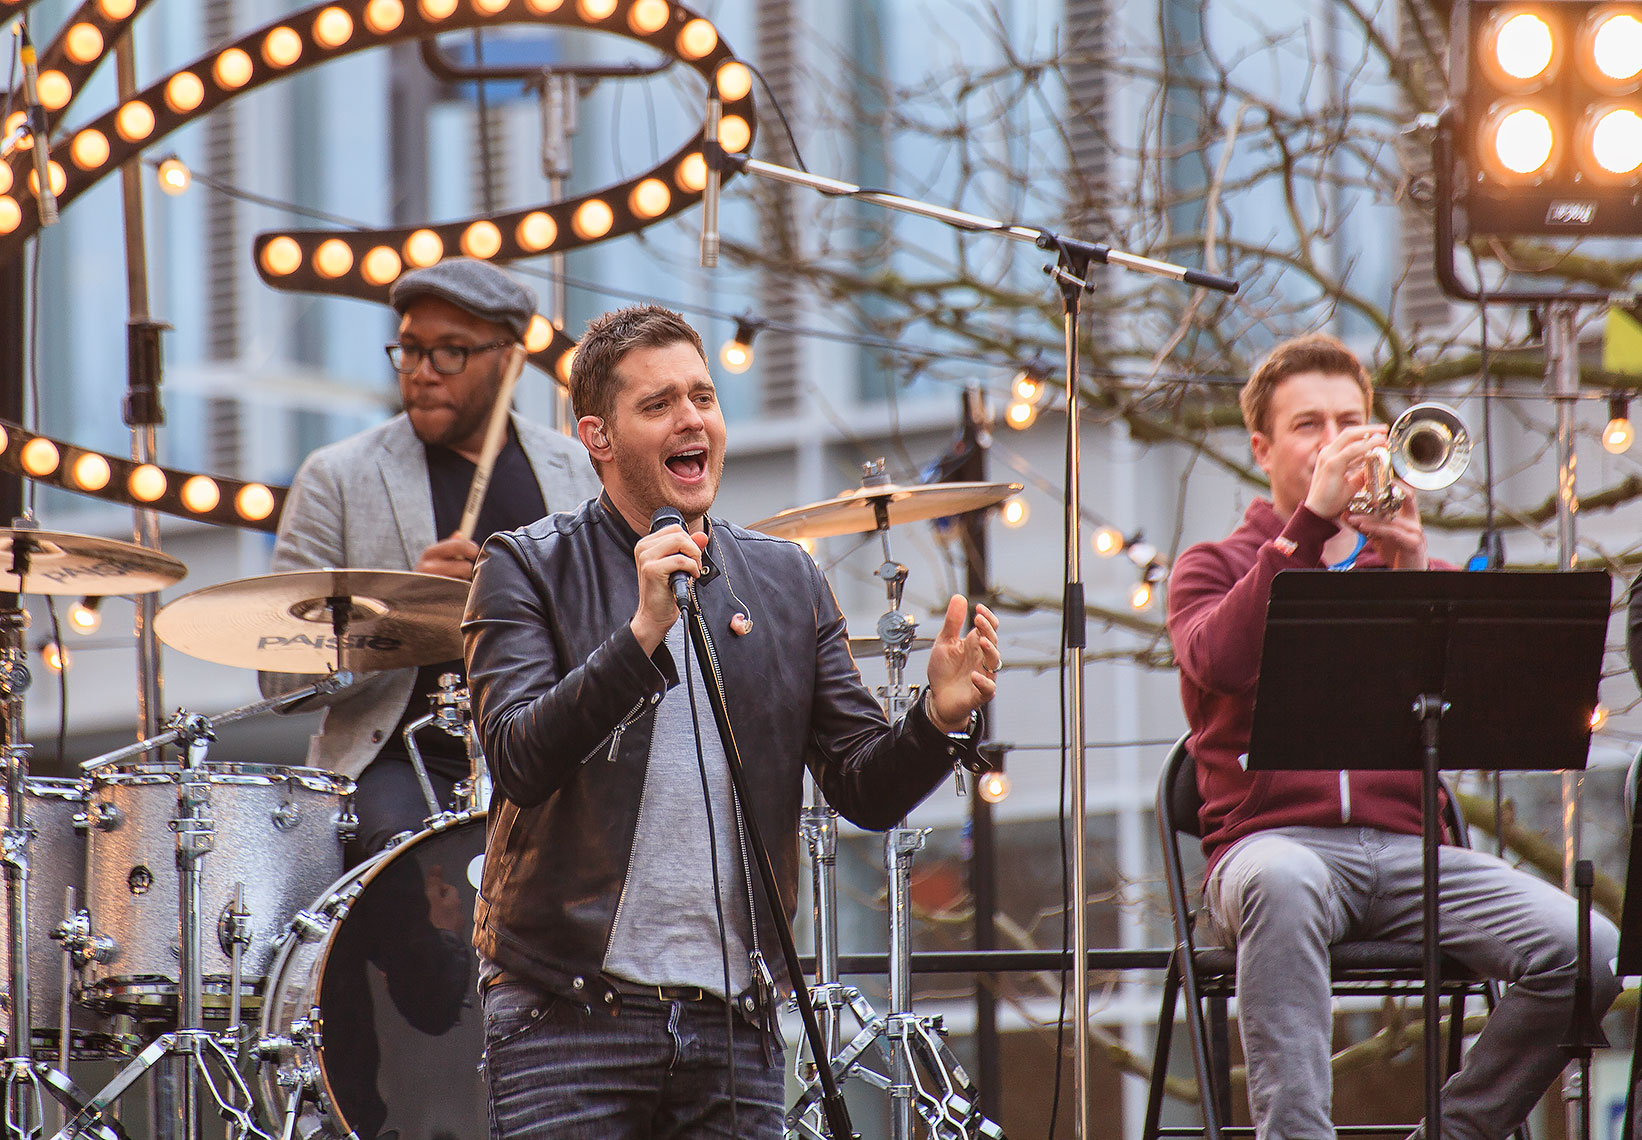 Michael Buble performing on stage at London event